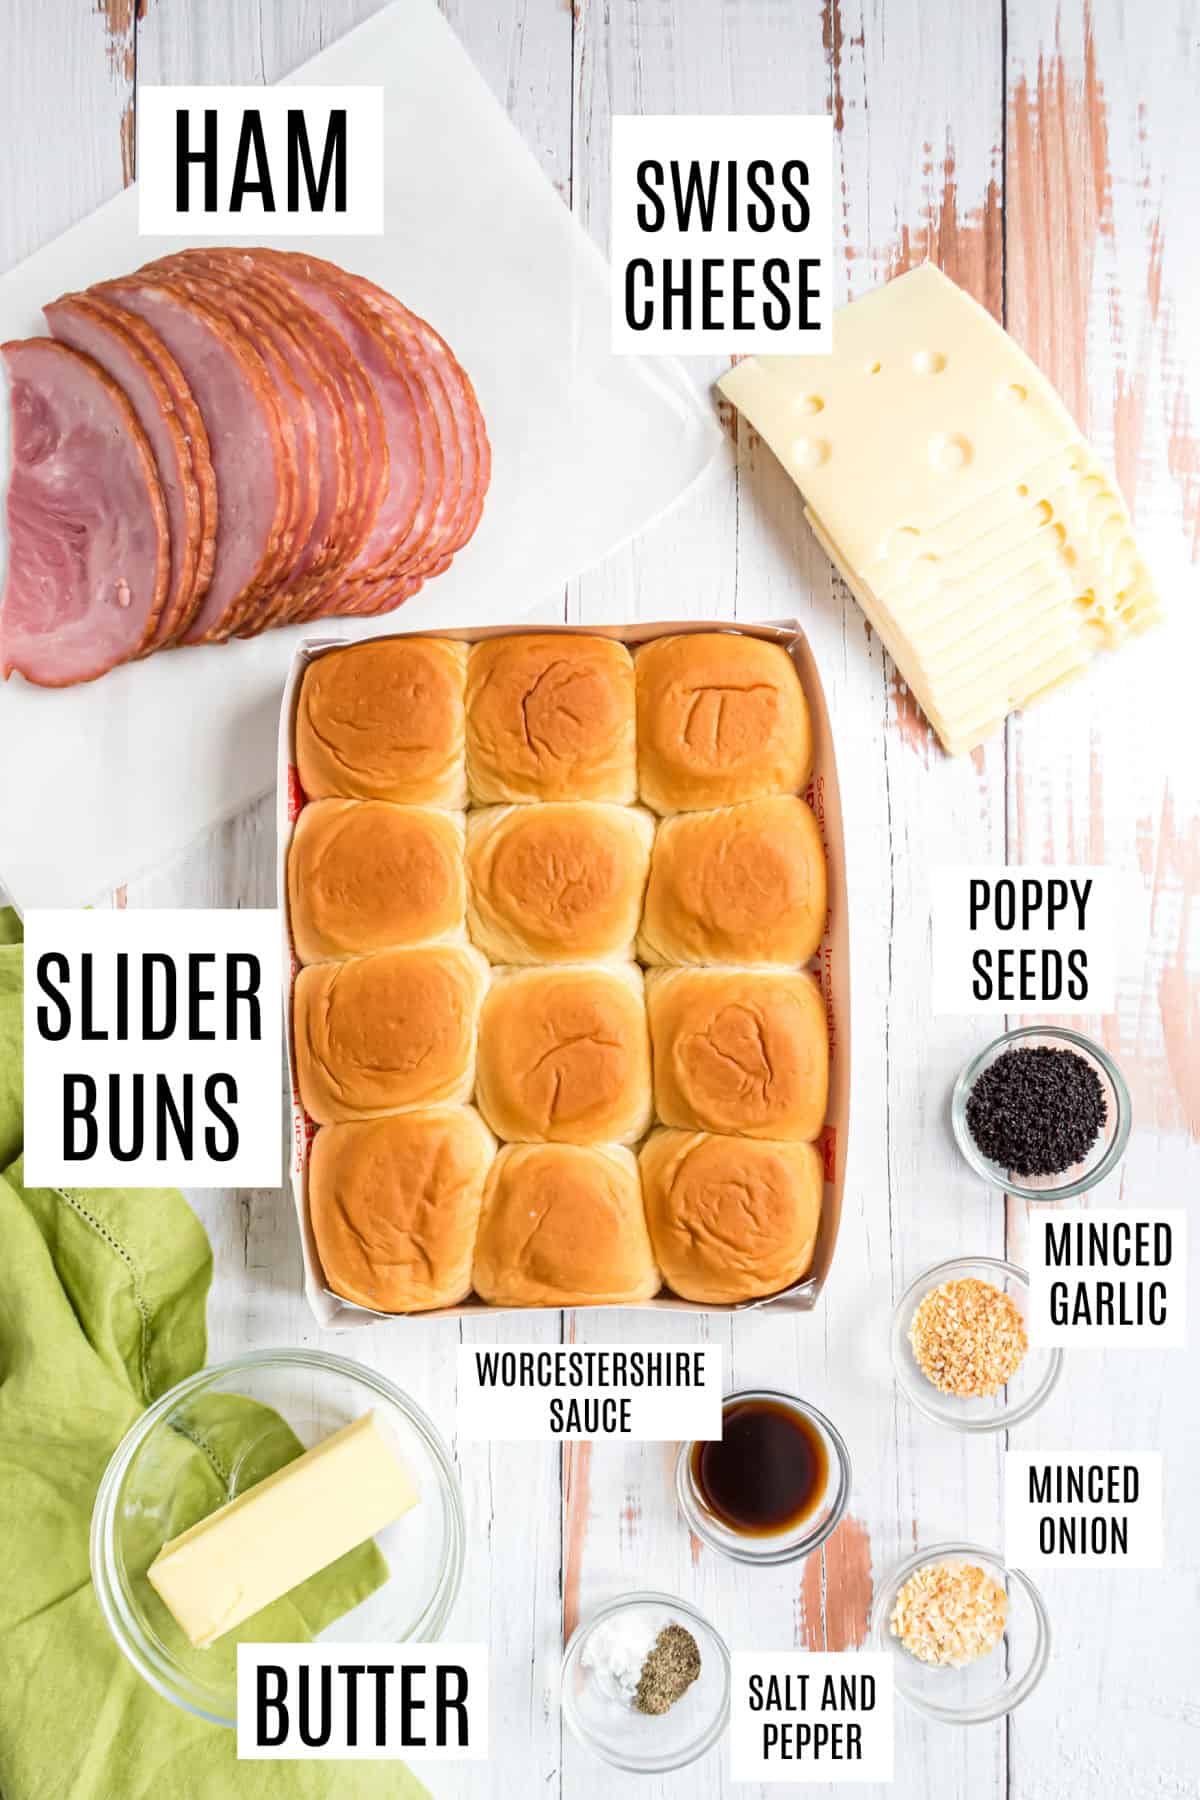 Ingredients needed to make ham and cheese sliders.